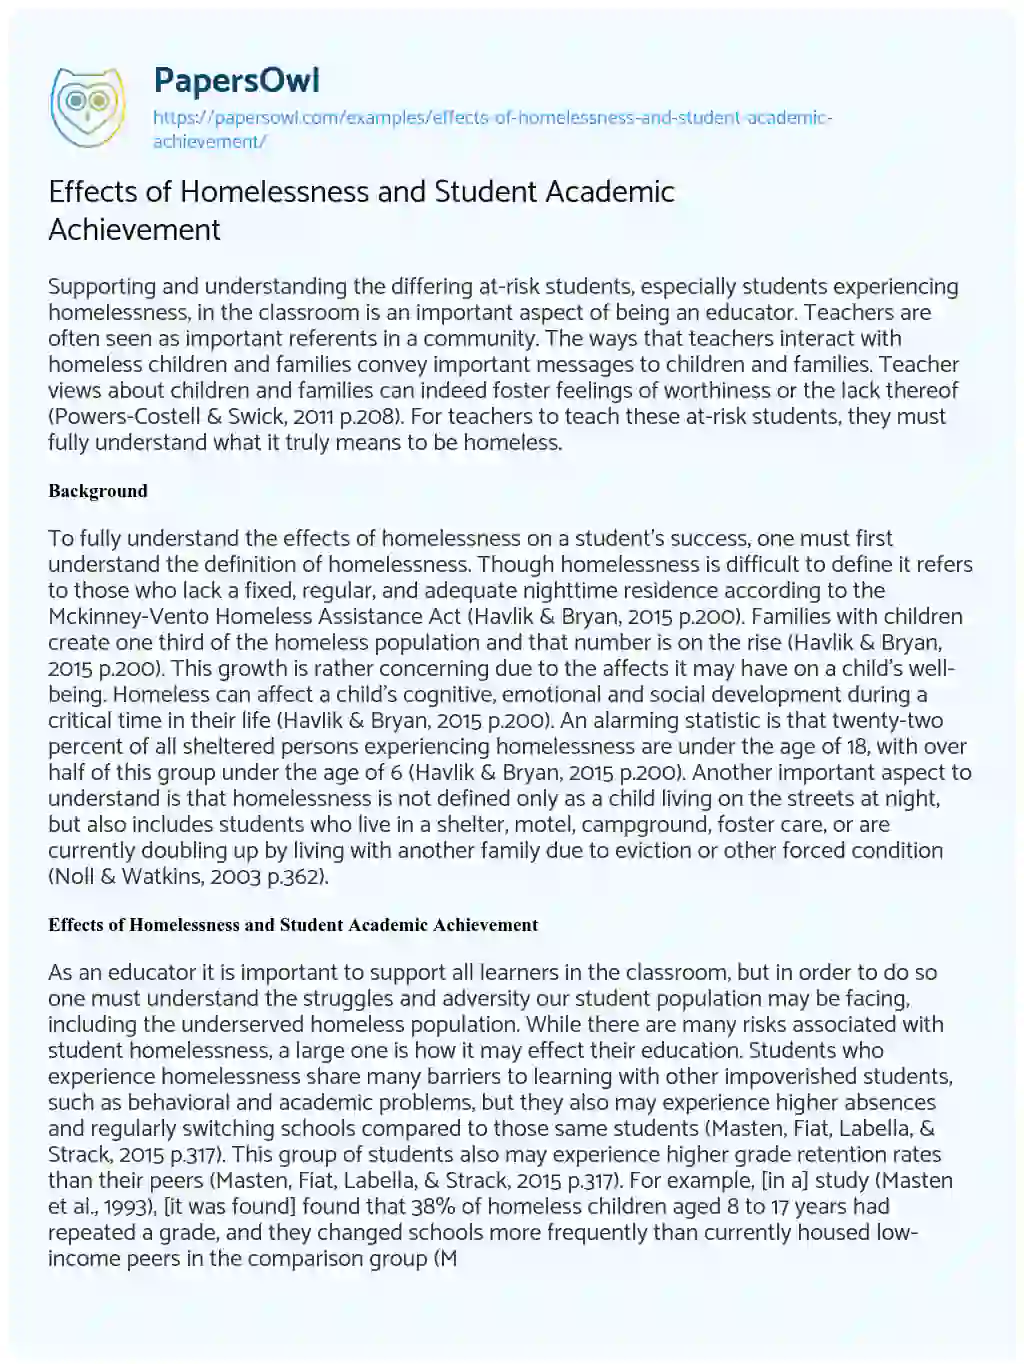 Effects of Homelessness and Student Academic Achievement essay